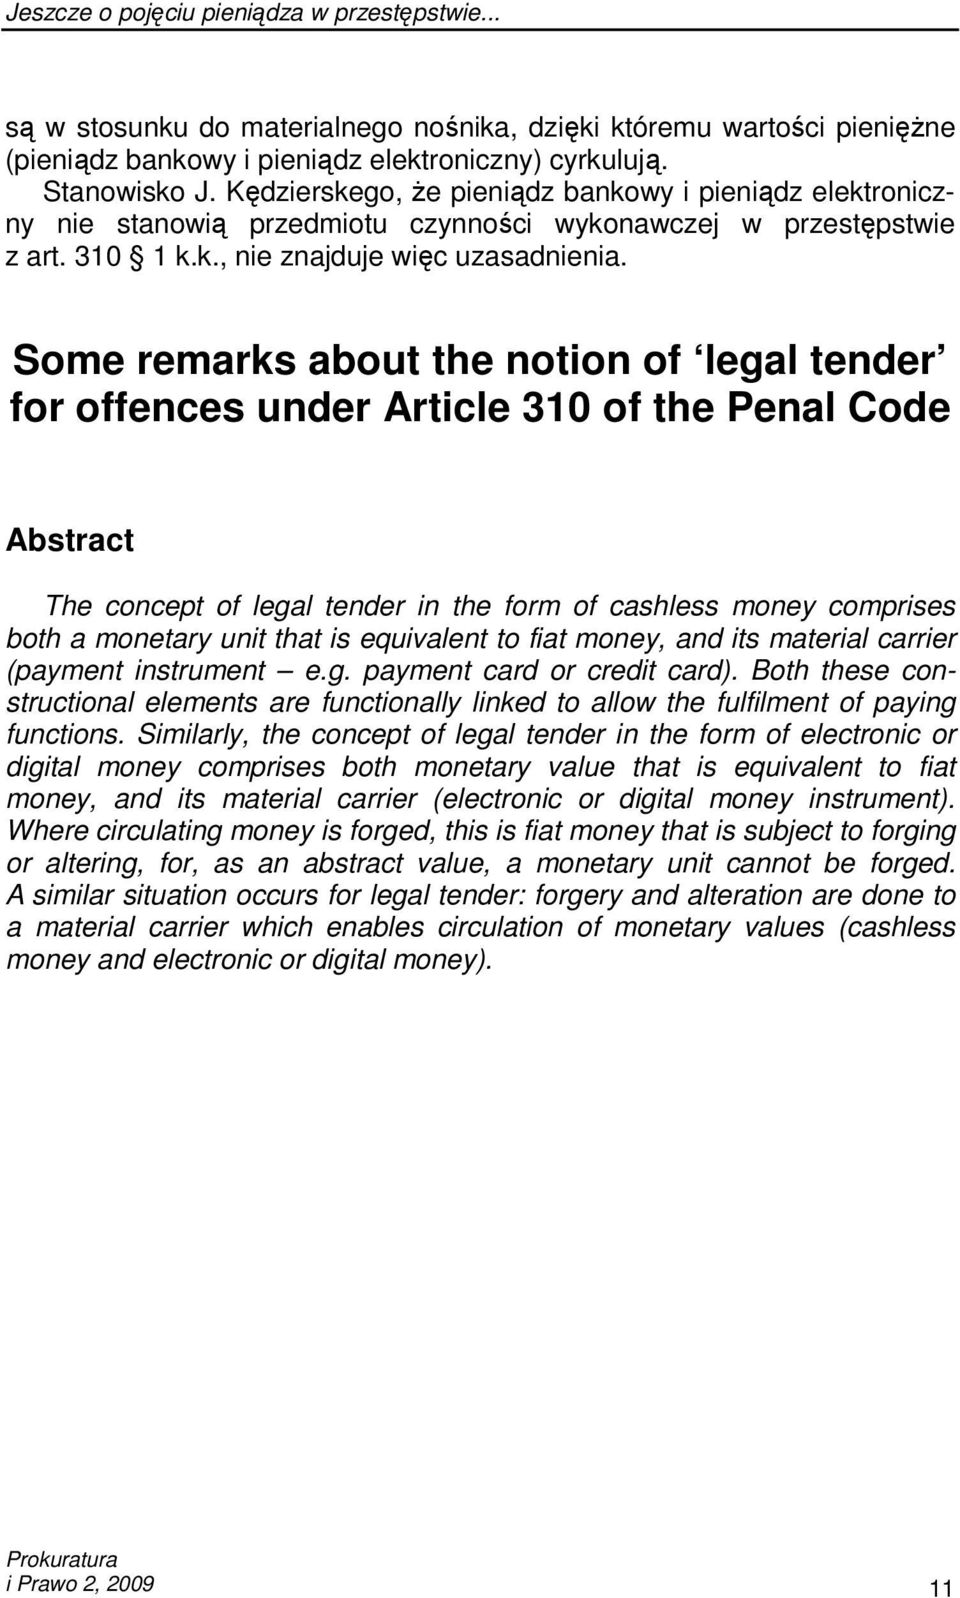 Some remarks about the notion of legal tender for offences under Article 310 of the Penal Code Abstract The concept of legal tender in the form of cashless money comprises both a monetary unit that